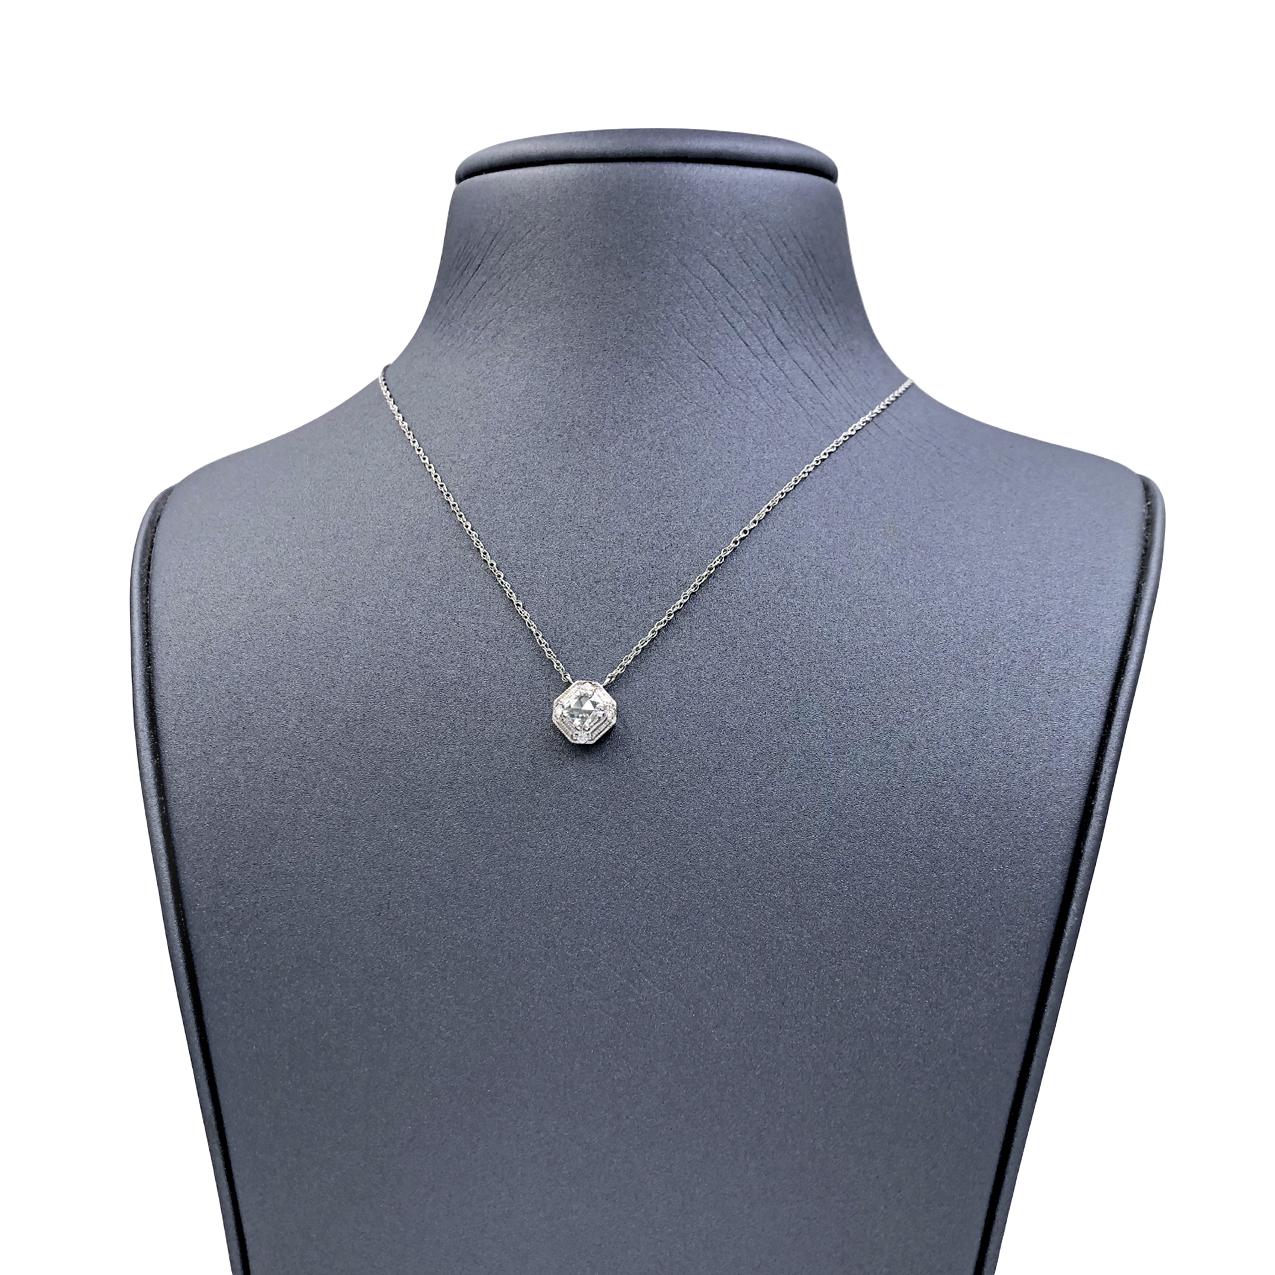 One of a Kind Deco Octagon Necklace handcrafted by  jewelry artist Julie Romanenko on a 14k white gold solid rope chain featuring a shimmering 0.35 carat rose-cut diamond set in 14k white gold prongs and accented by four round brilliant-cut diamonds